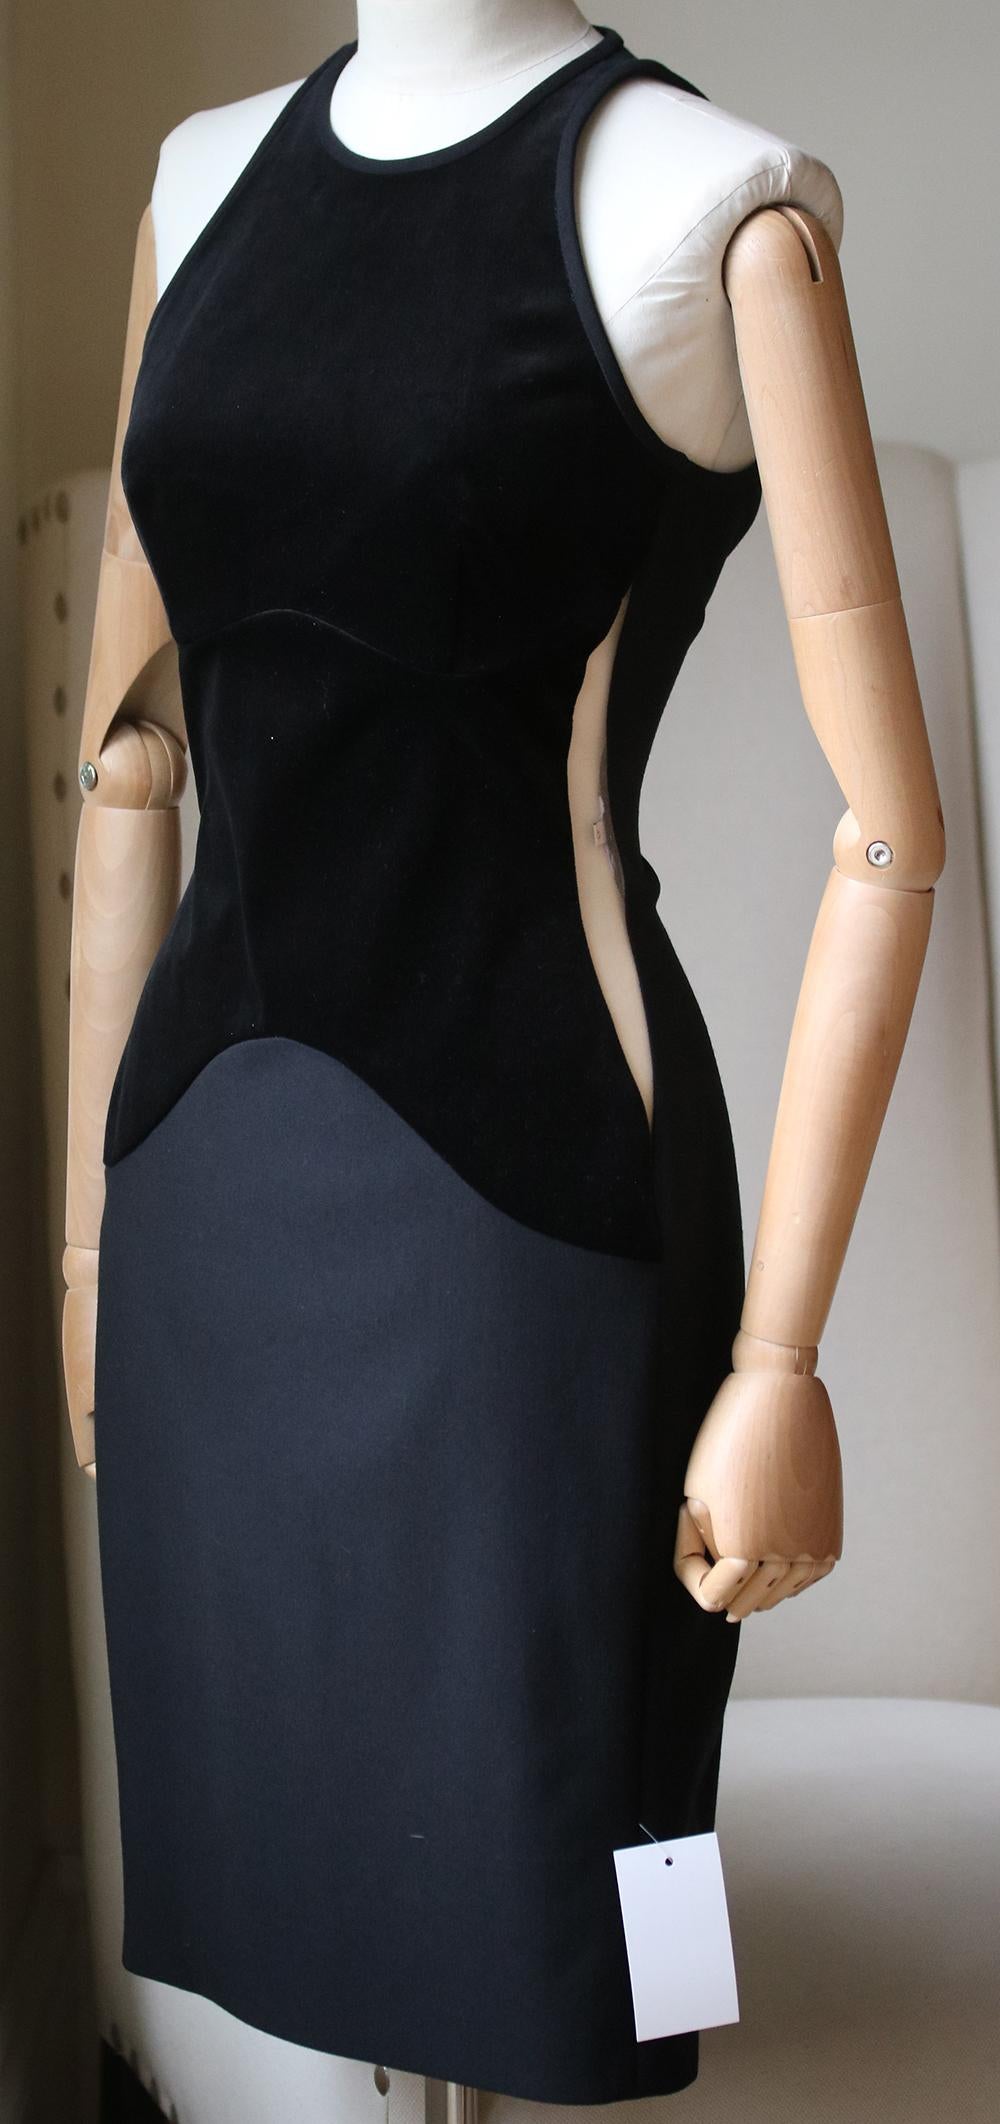 This iconic black sleeveless dress from Stella McCartney has a round neck, nude sheer mesh cut-out panels at the sides, velvet panelling and centre-back fastening. 

Size: IT 42 (UK 10, US 6, FR 38)

Condition: As new condition, no sign of wear. 